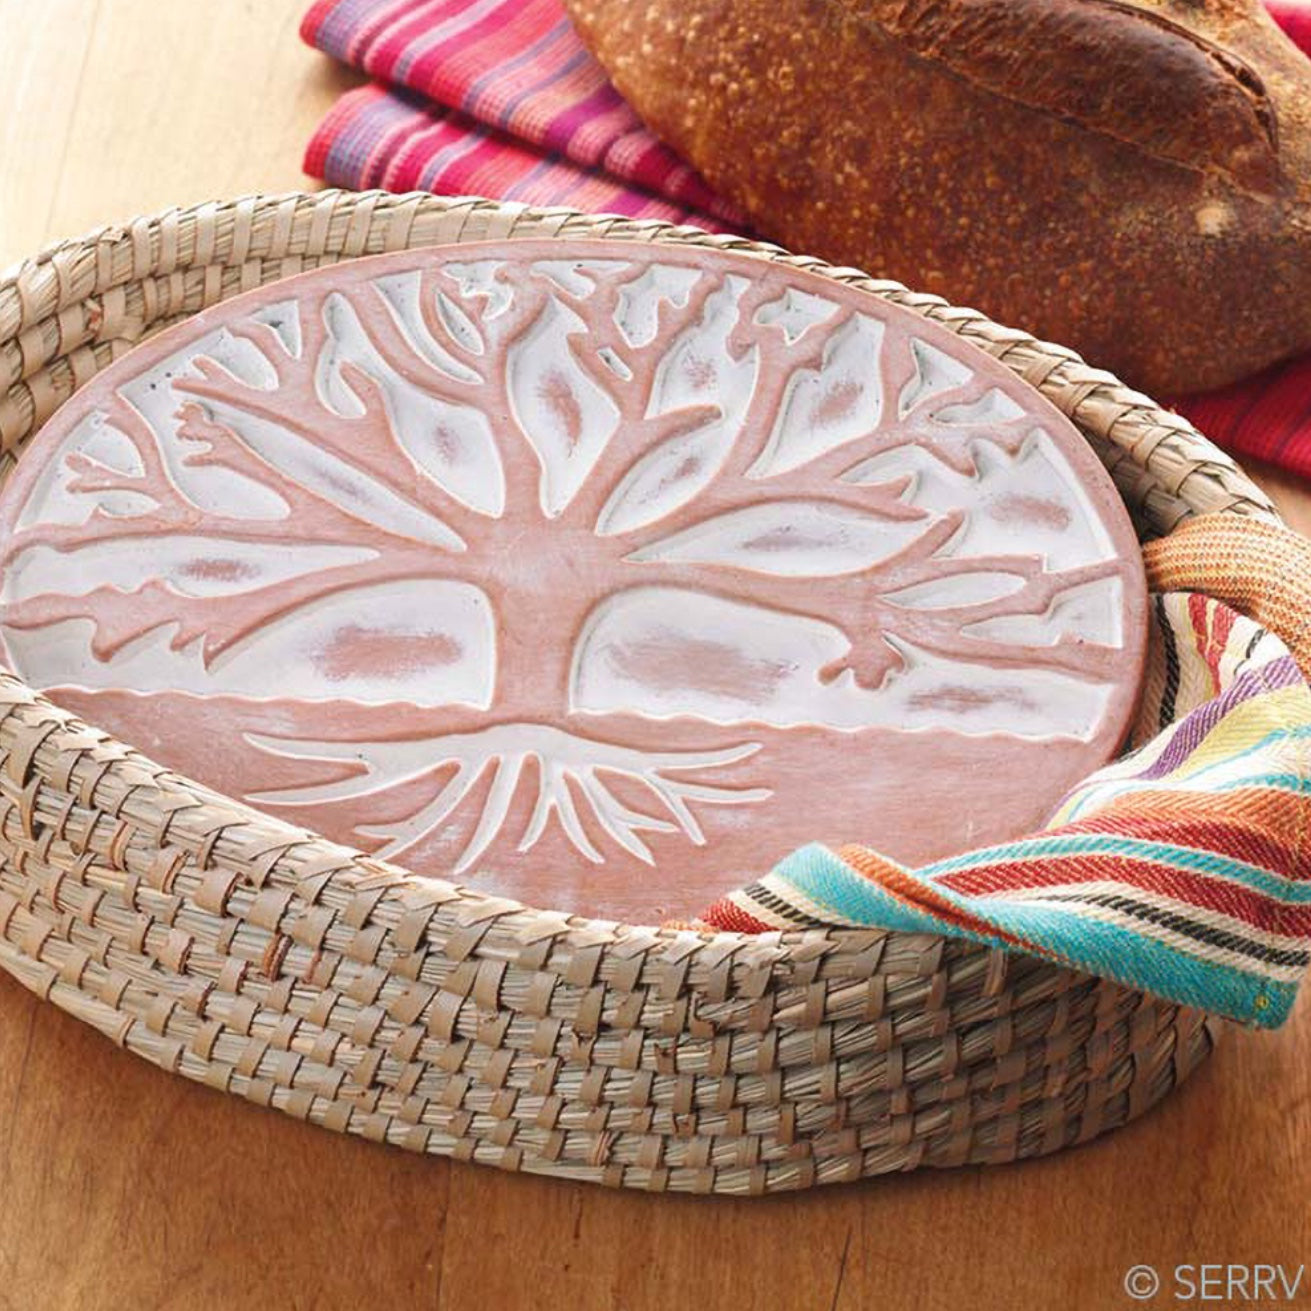 Tree of Life Breadwarmer (*Local Pickup/Local Delivery Only)